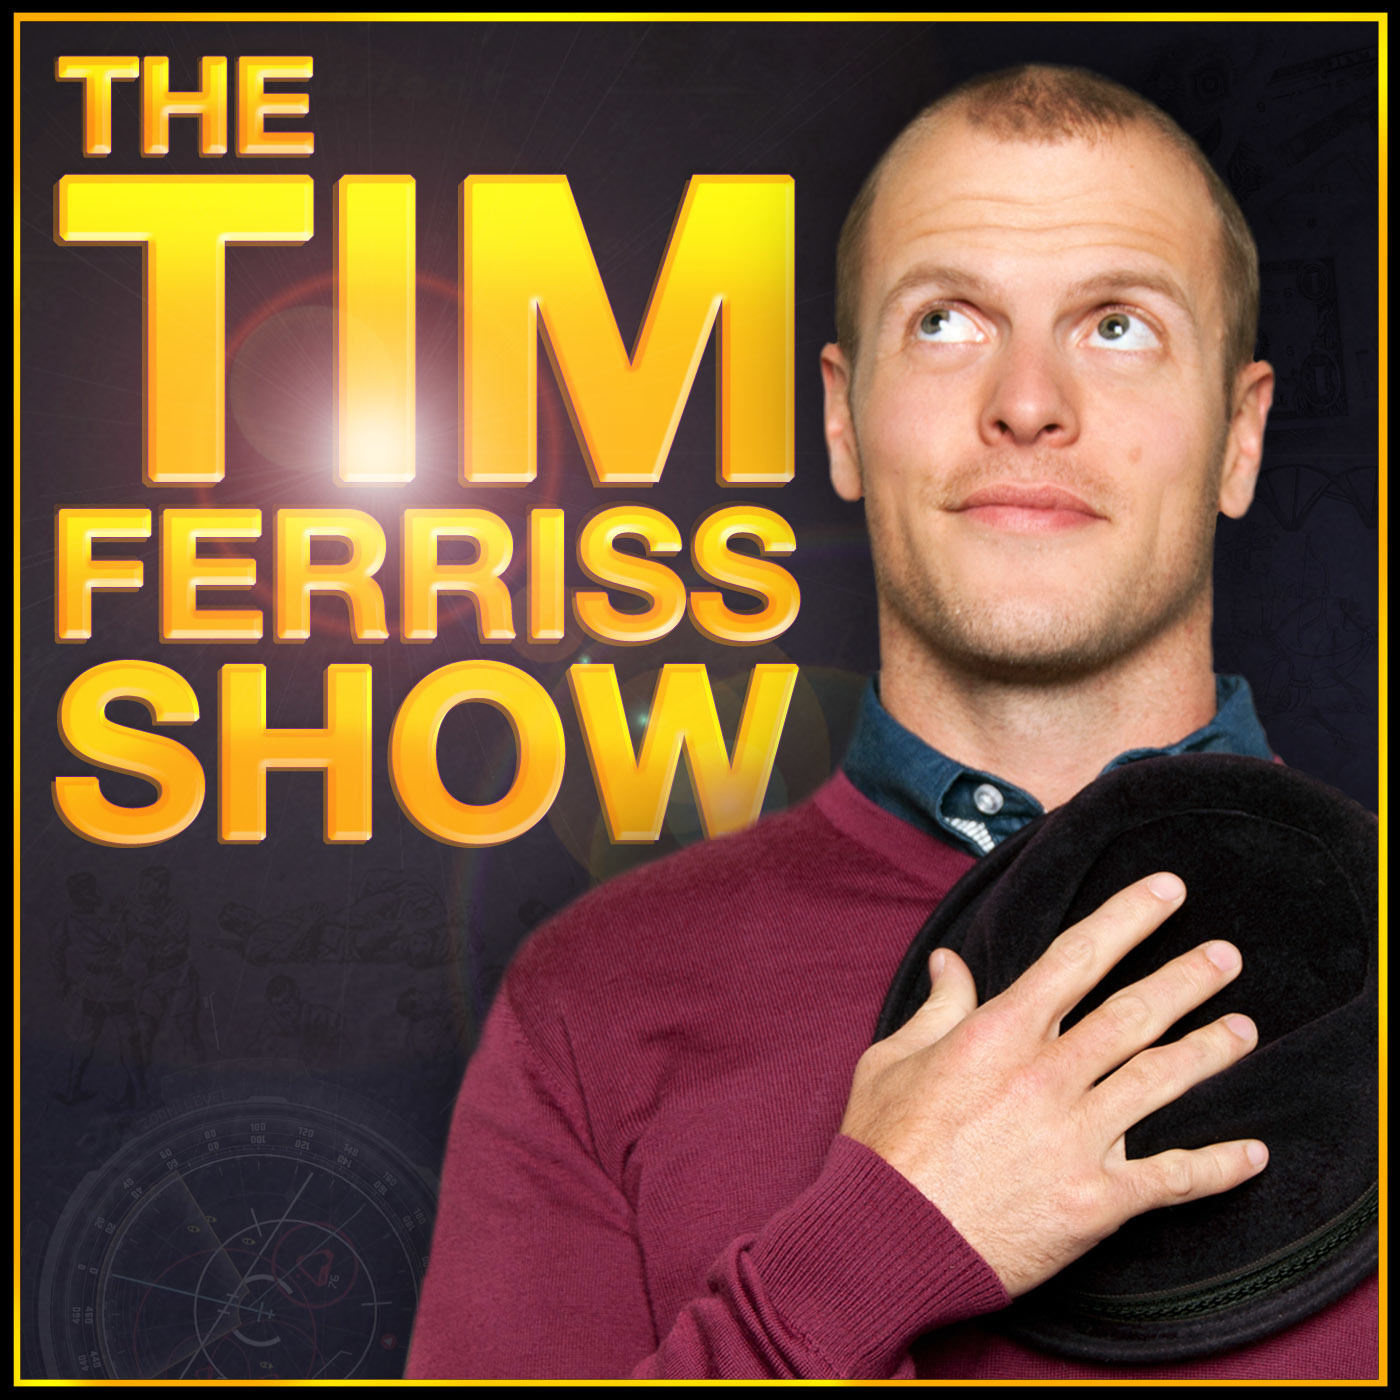 During Their Last Podcast, Tim & Ramit Had an Insightful Conversation About Prenups